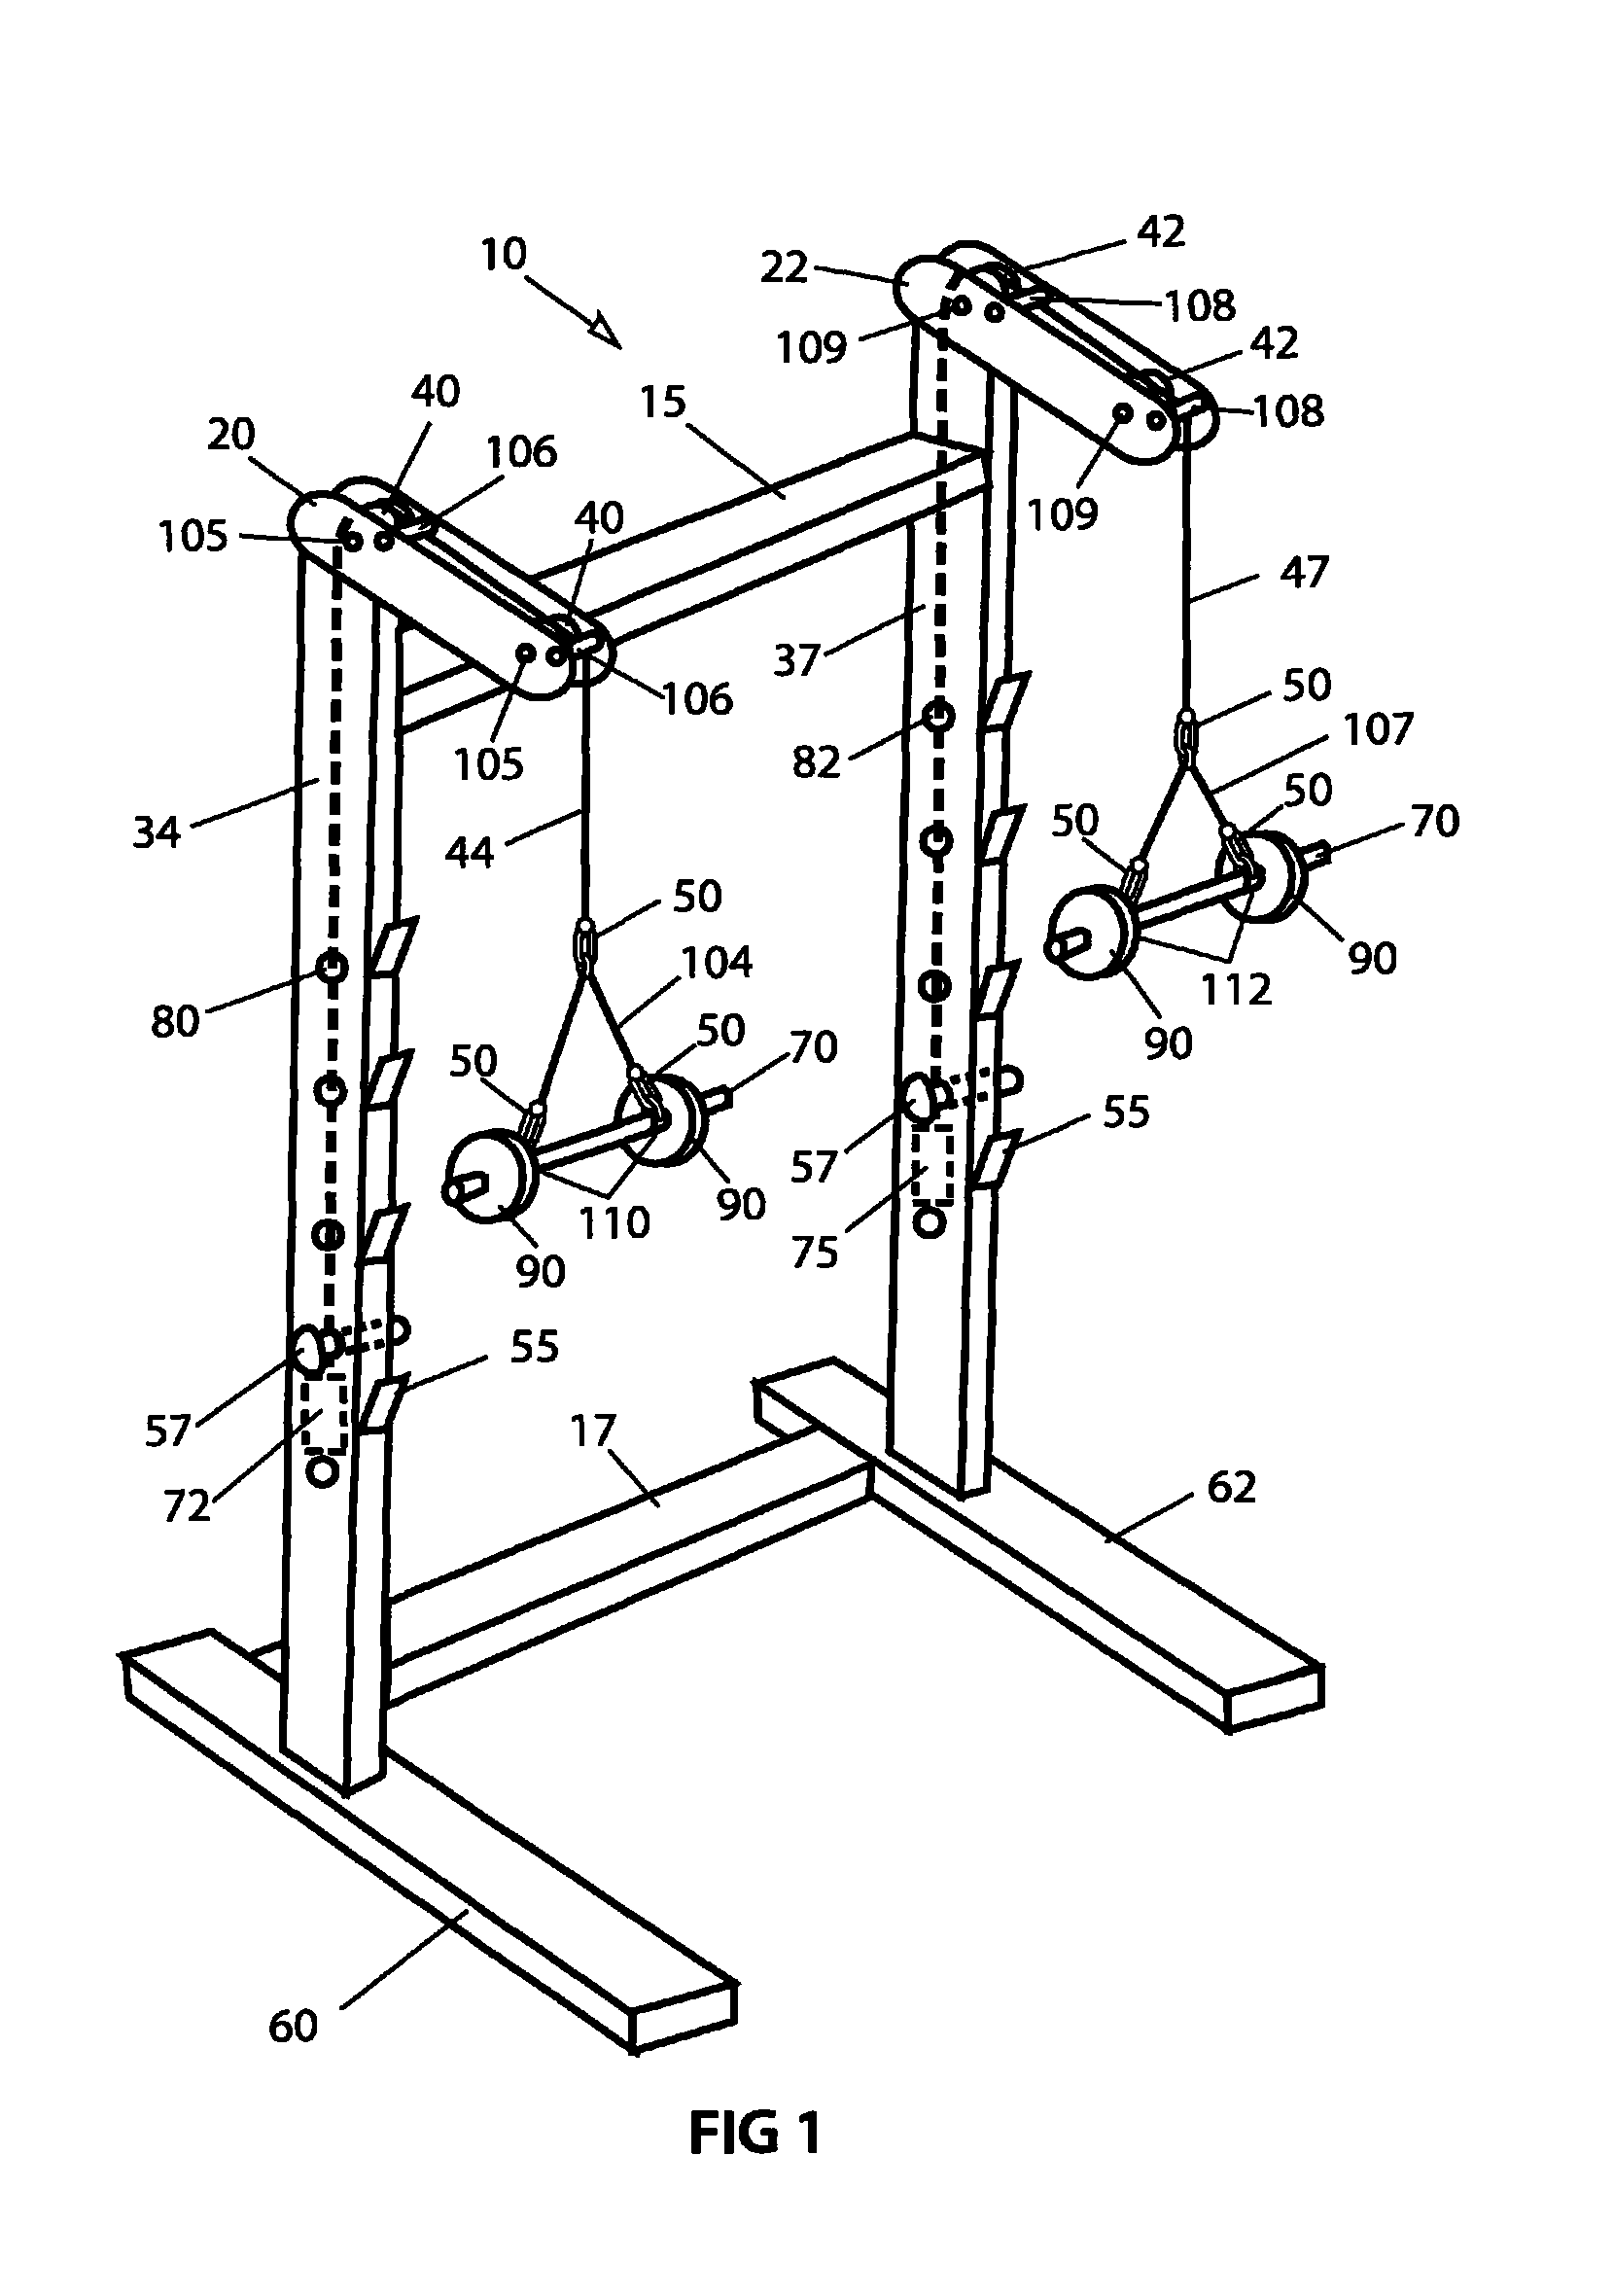 Cable and pulley weightlifting system apparatus